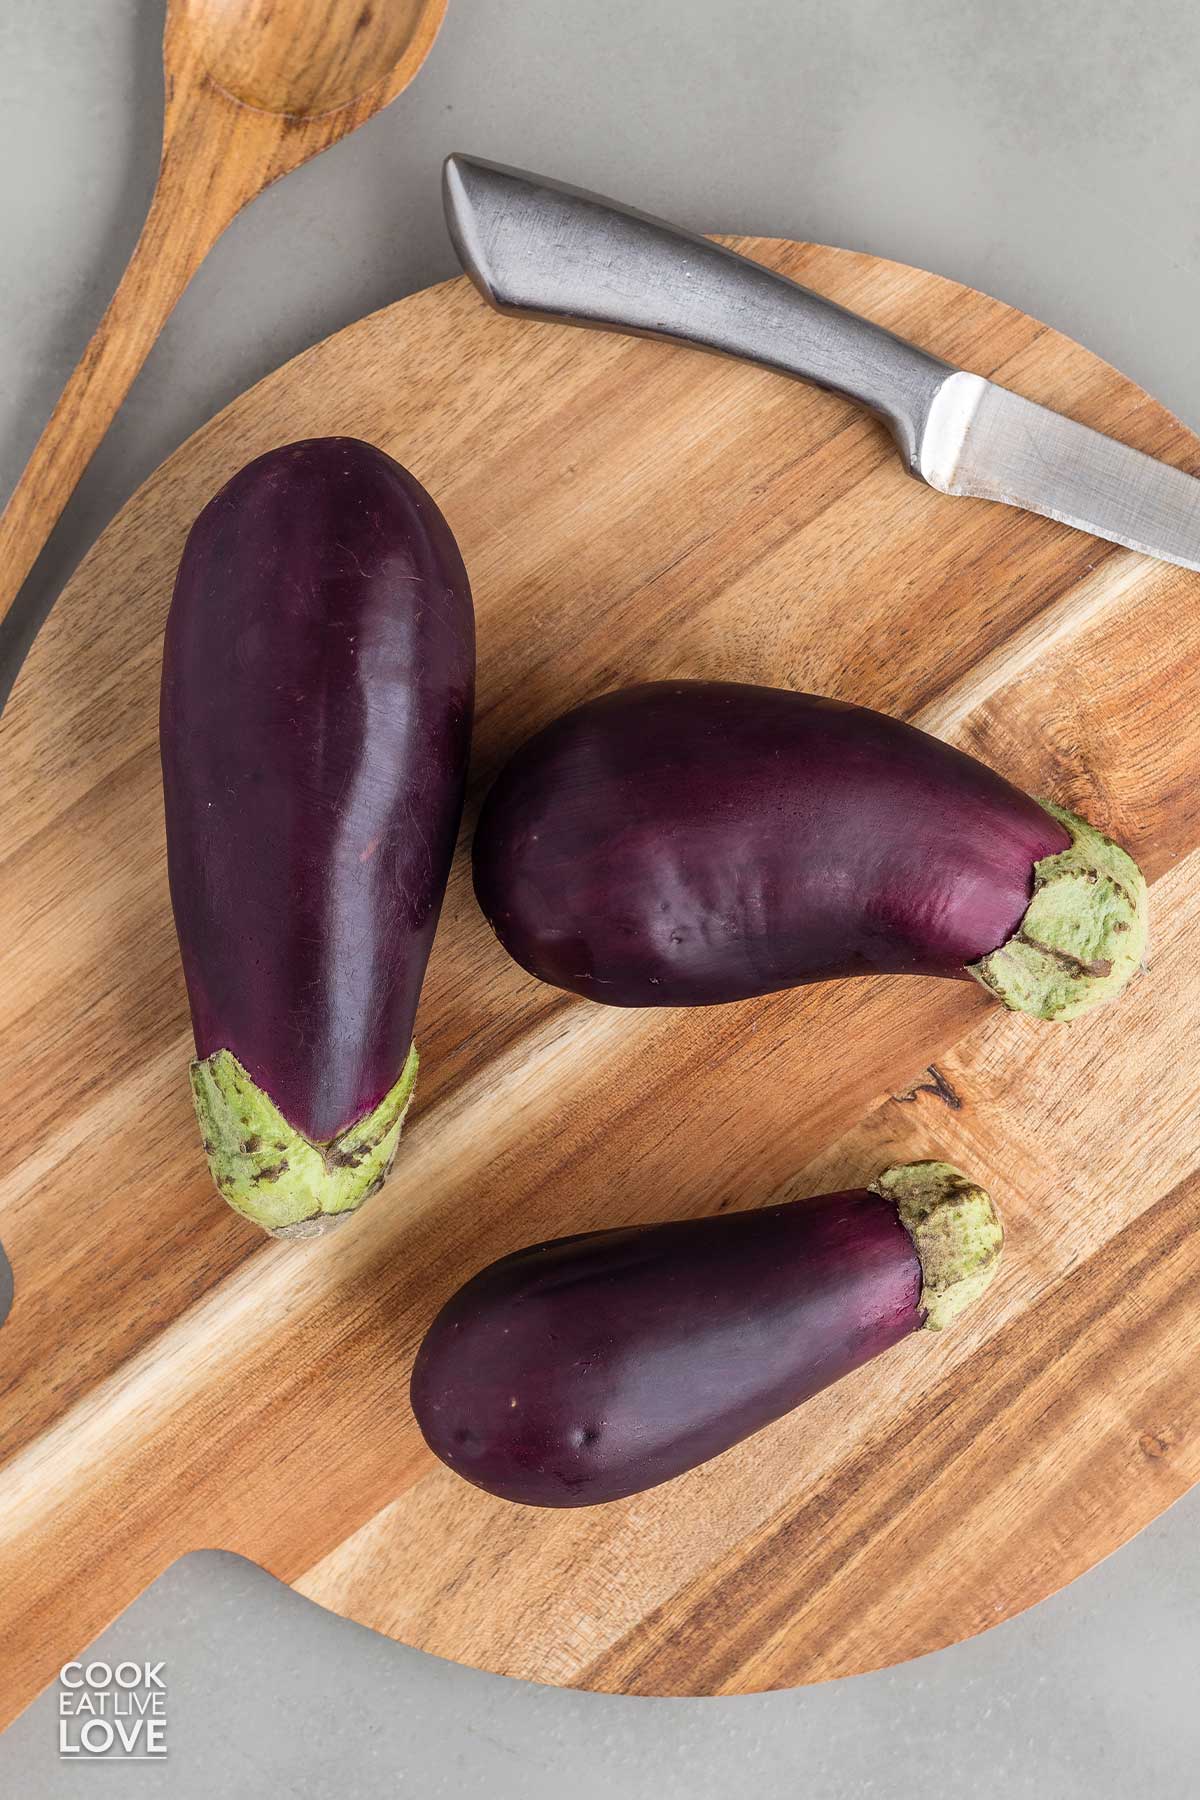 Whole eggplant on the table on a board.